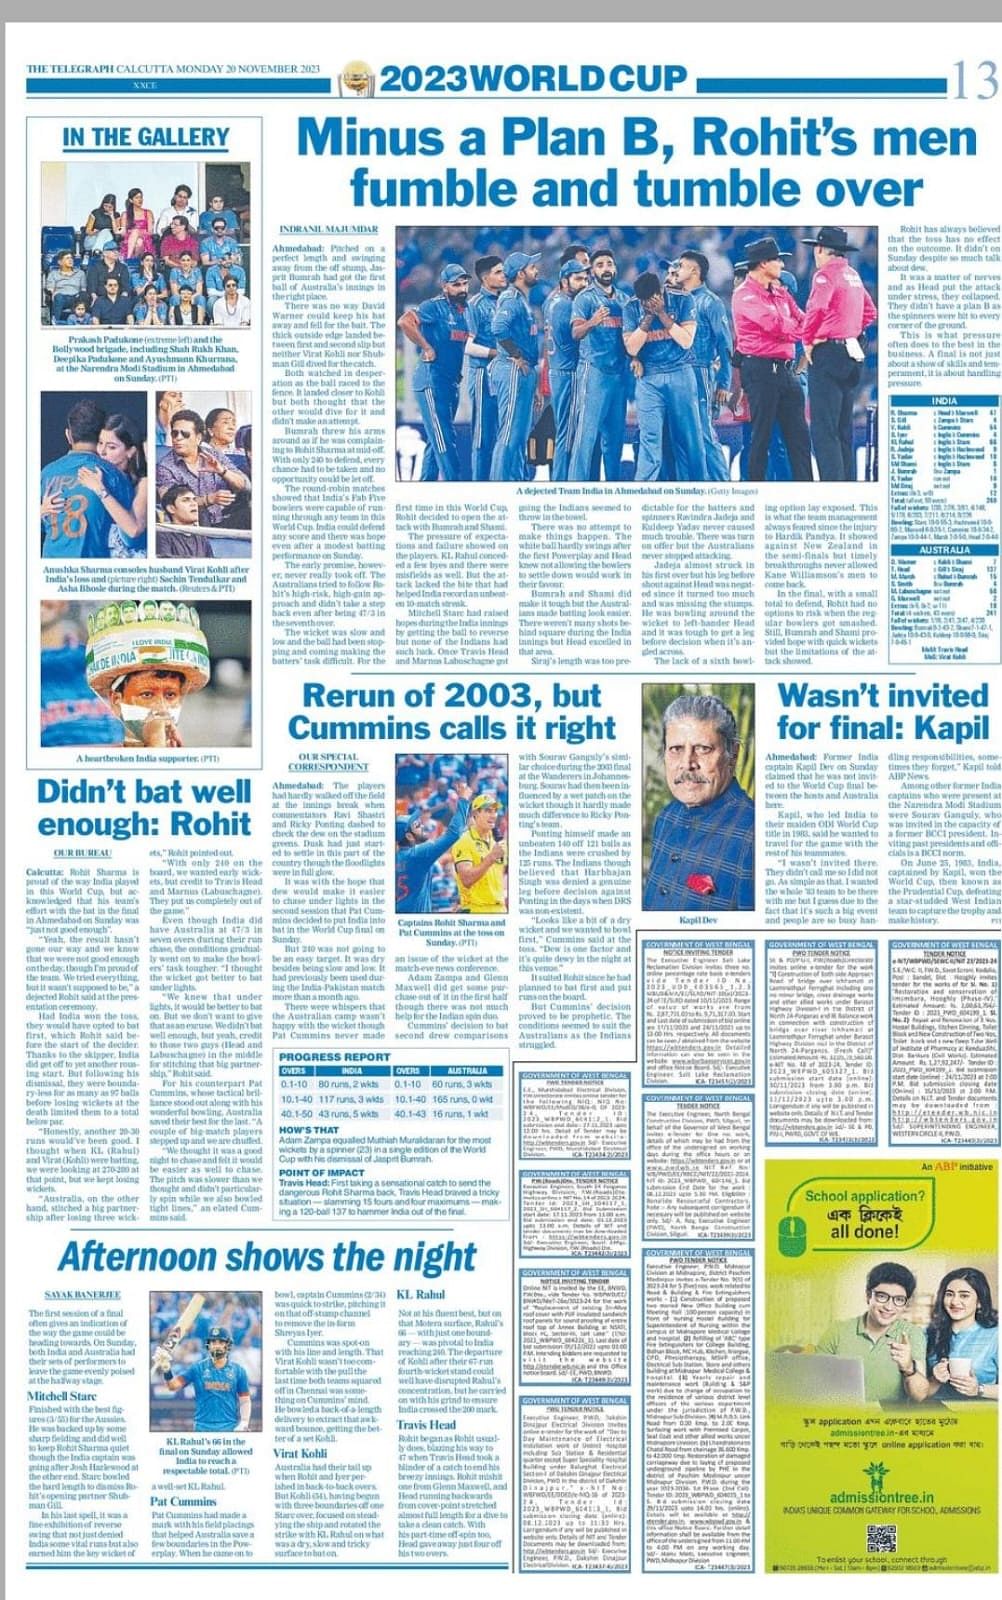 The Telegraph turns blue in tribute to the Indian team